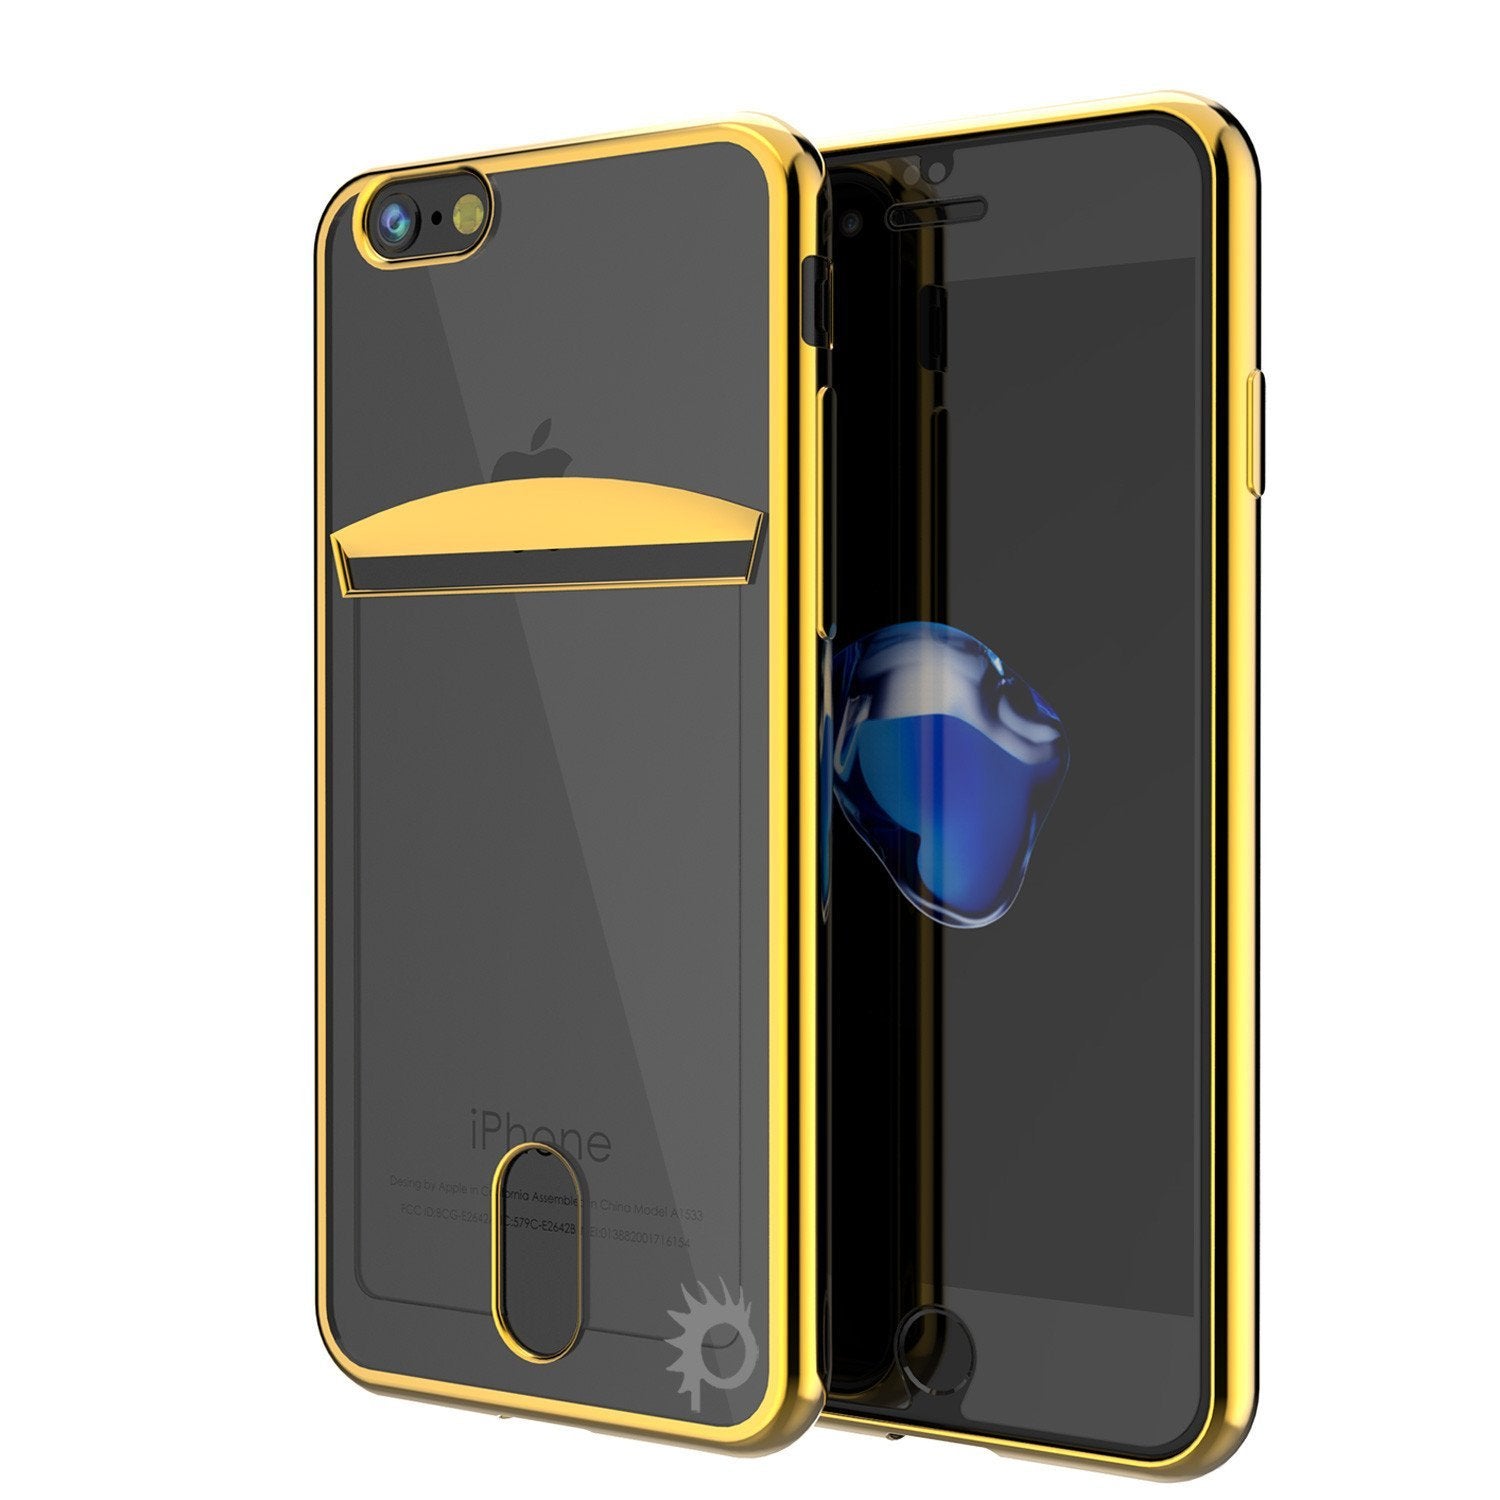 iPhone 8+ Plus Case, PUNKCASE® LUCID Gold Series | Card Slot | SHIELD Screen Protector | Ultra fit - PunkCase NZ